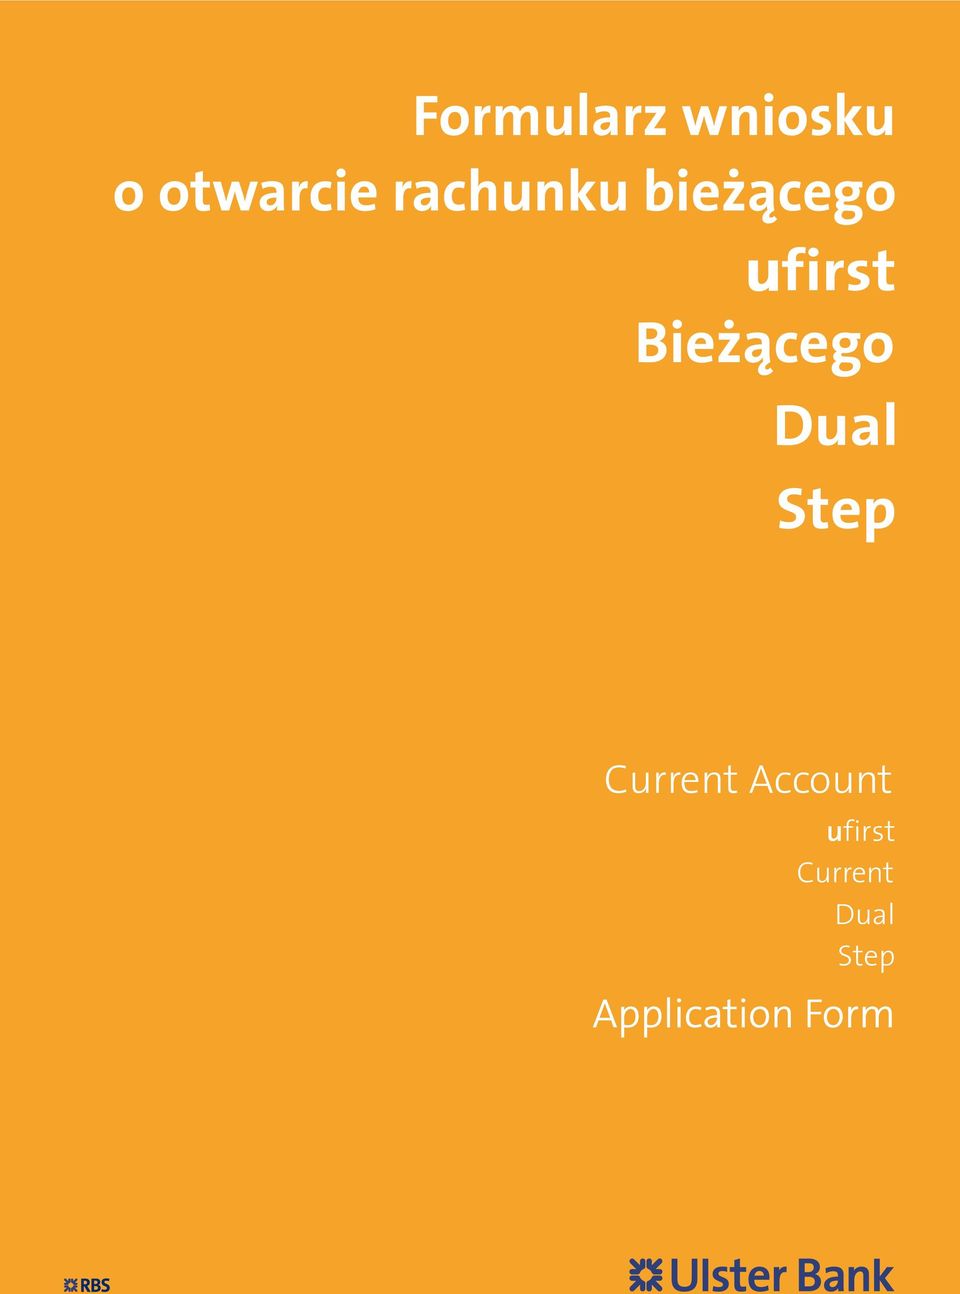 ¹cego Dual Step Current Account